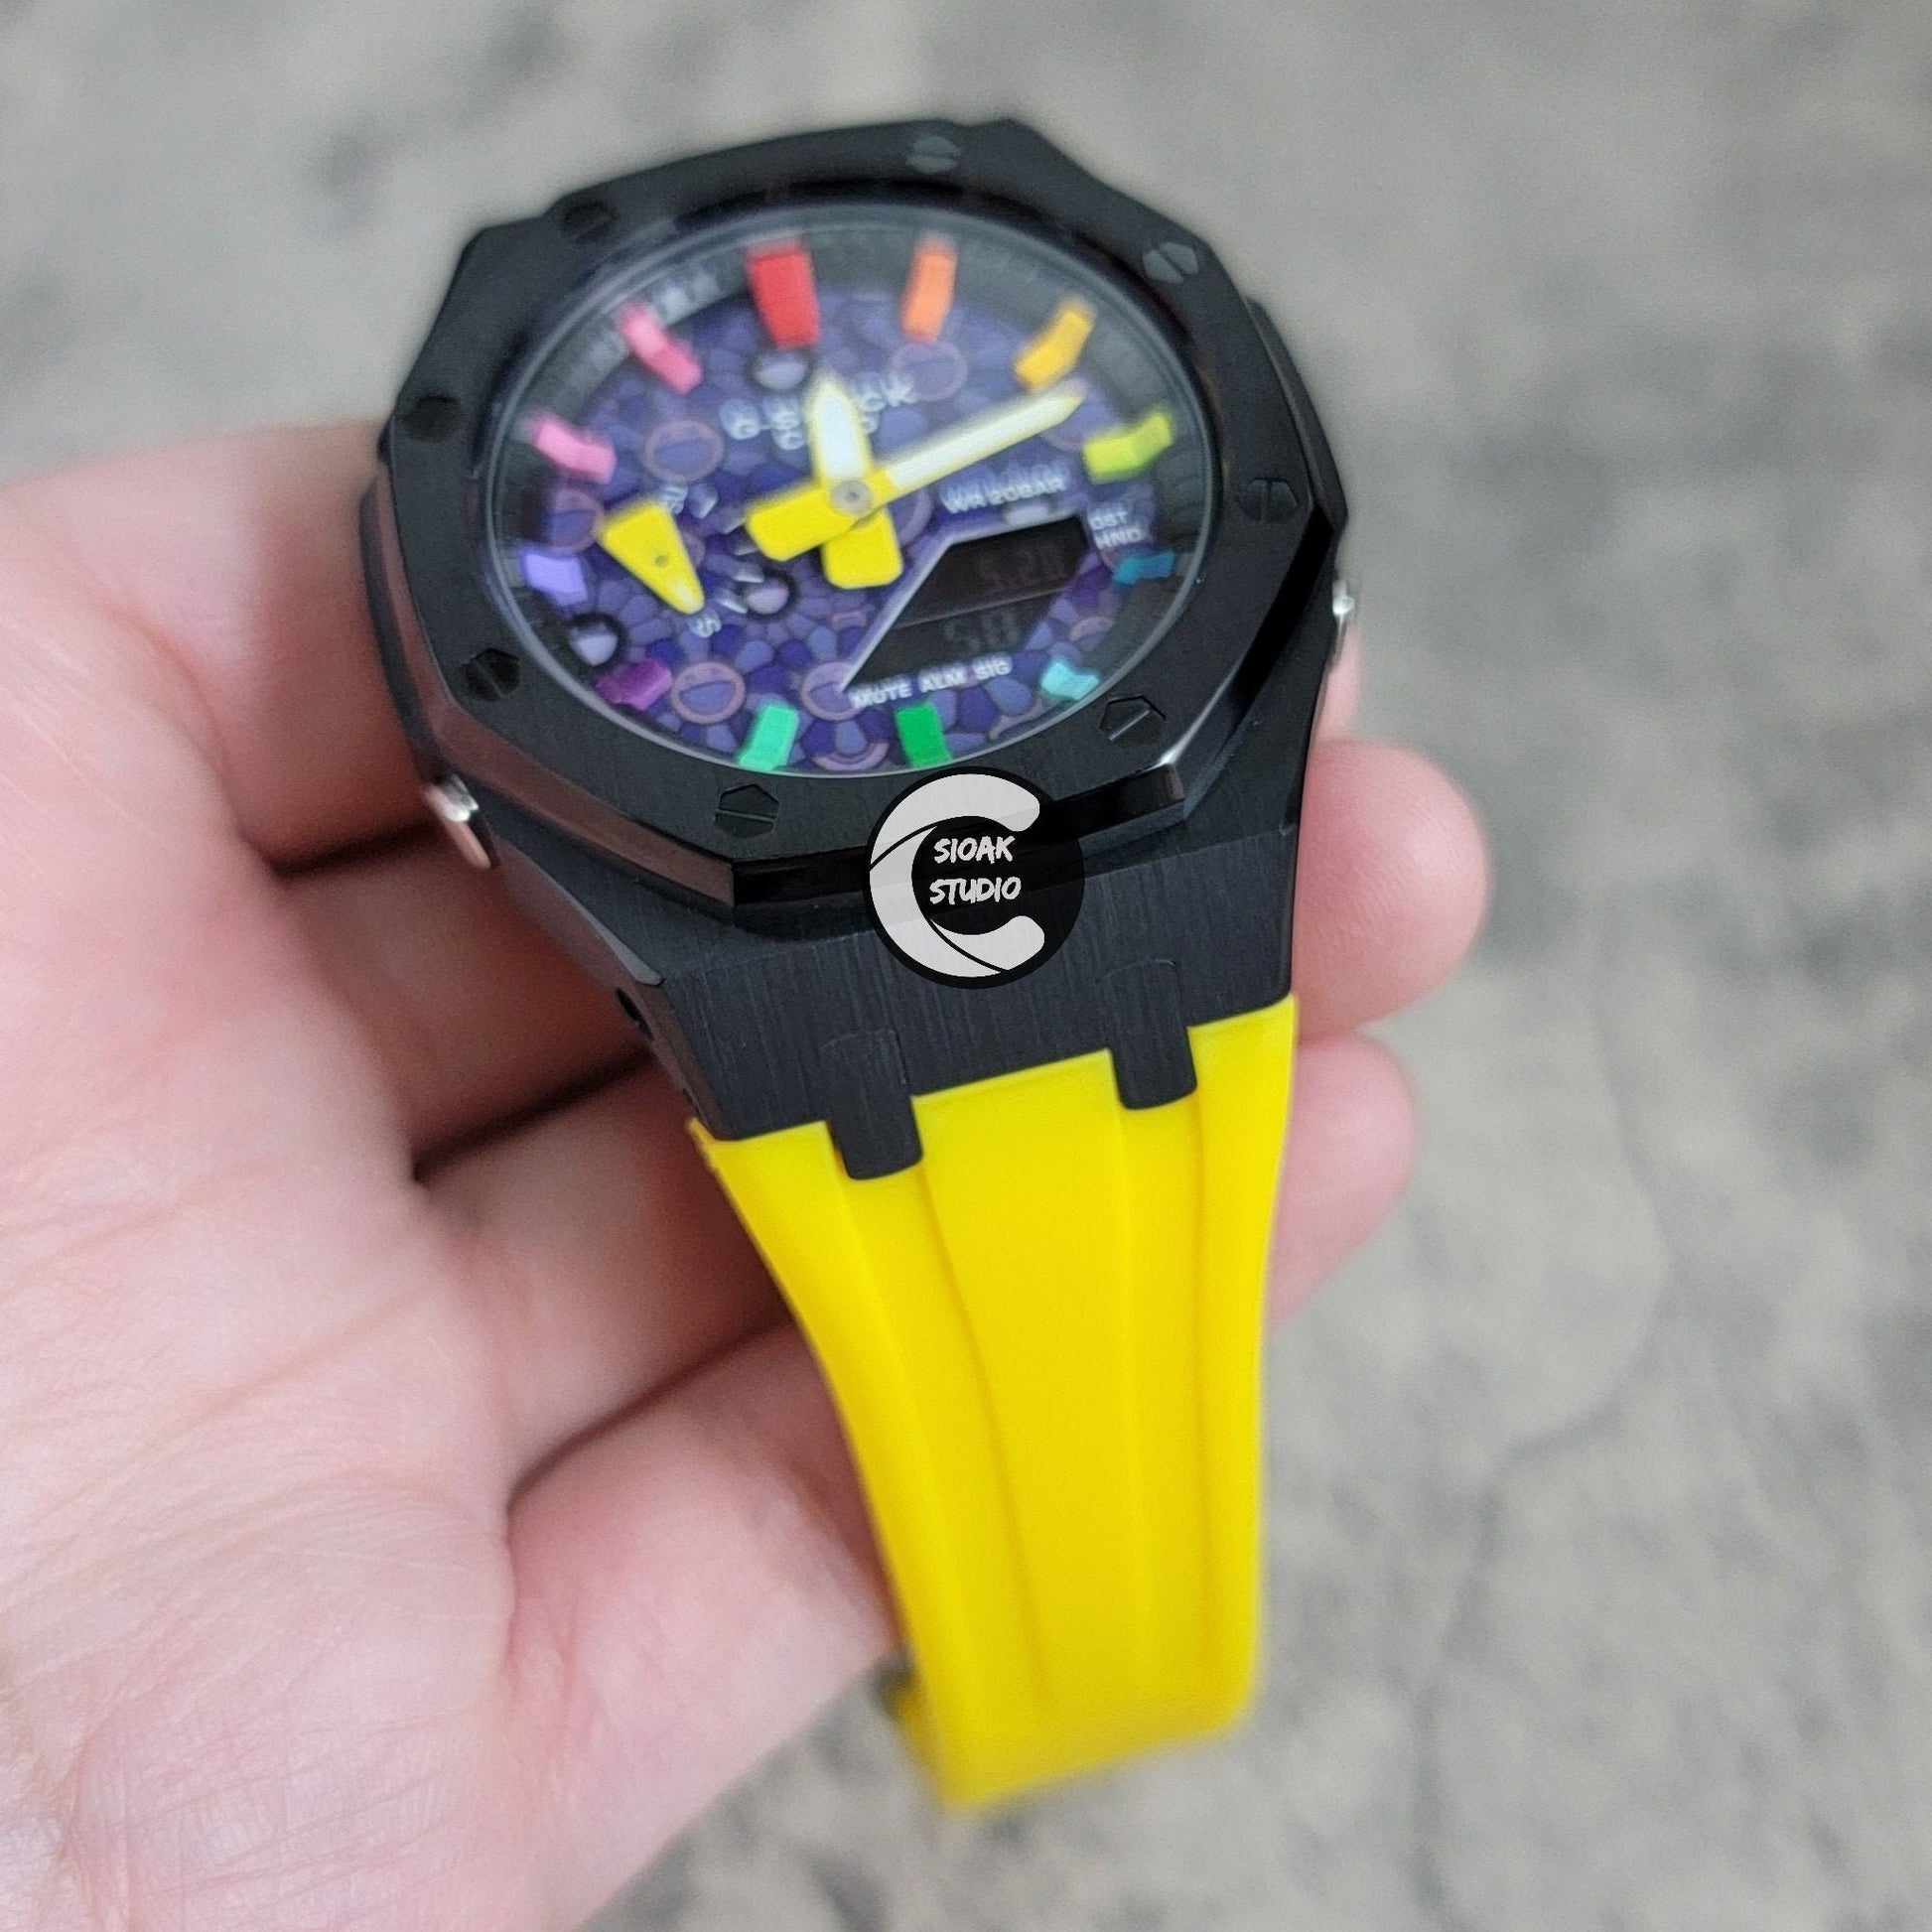 Casio G-shock Casioak / Casio oak - custom mod - rainbow for $282 for sale  from a Trusted Seller on Chrono24